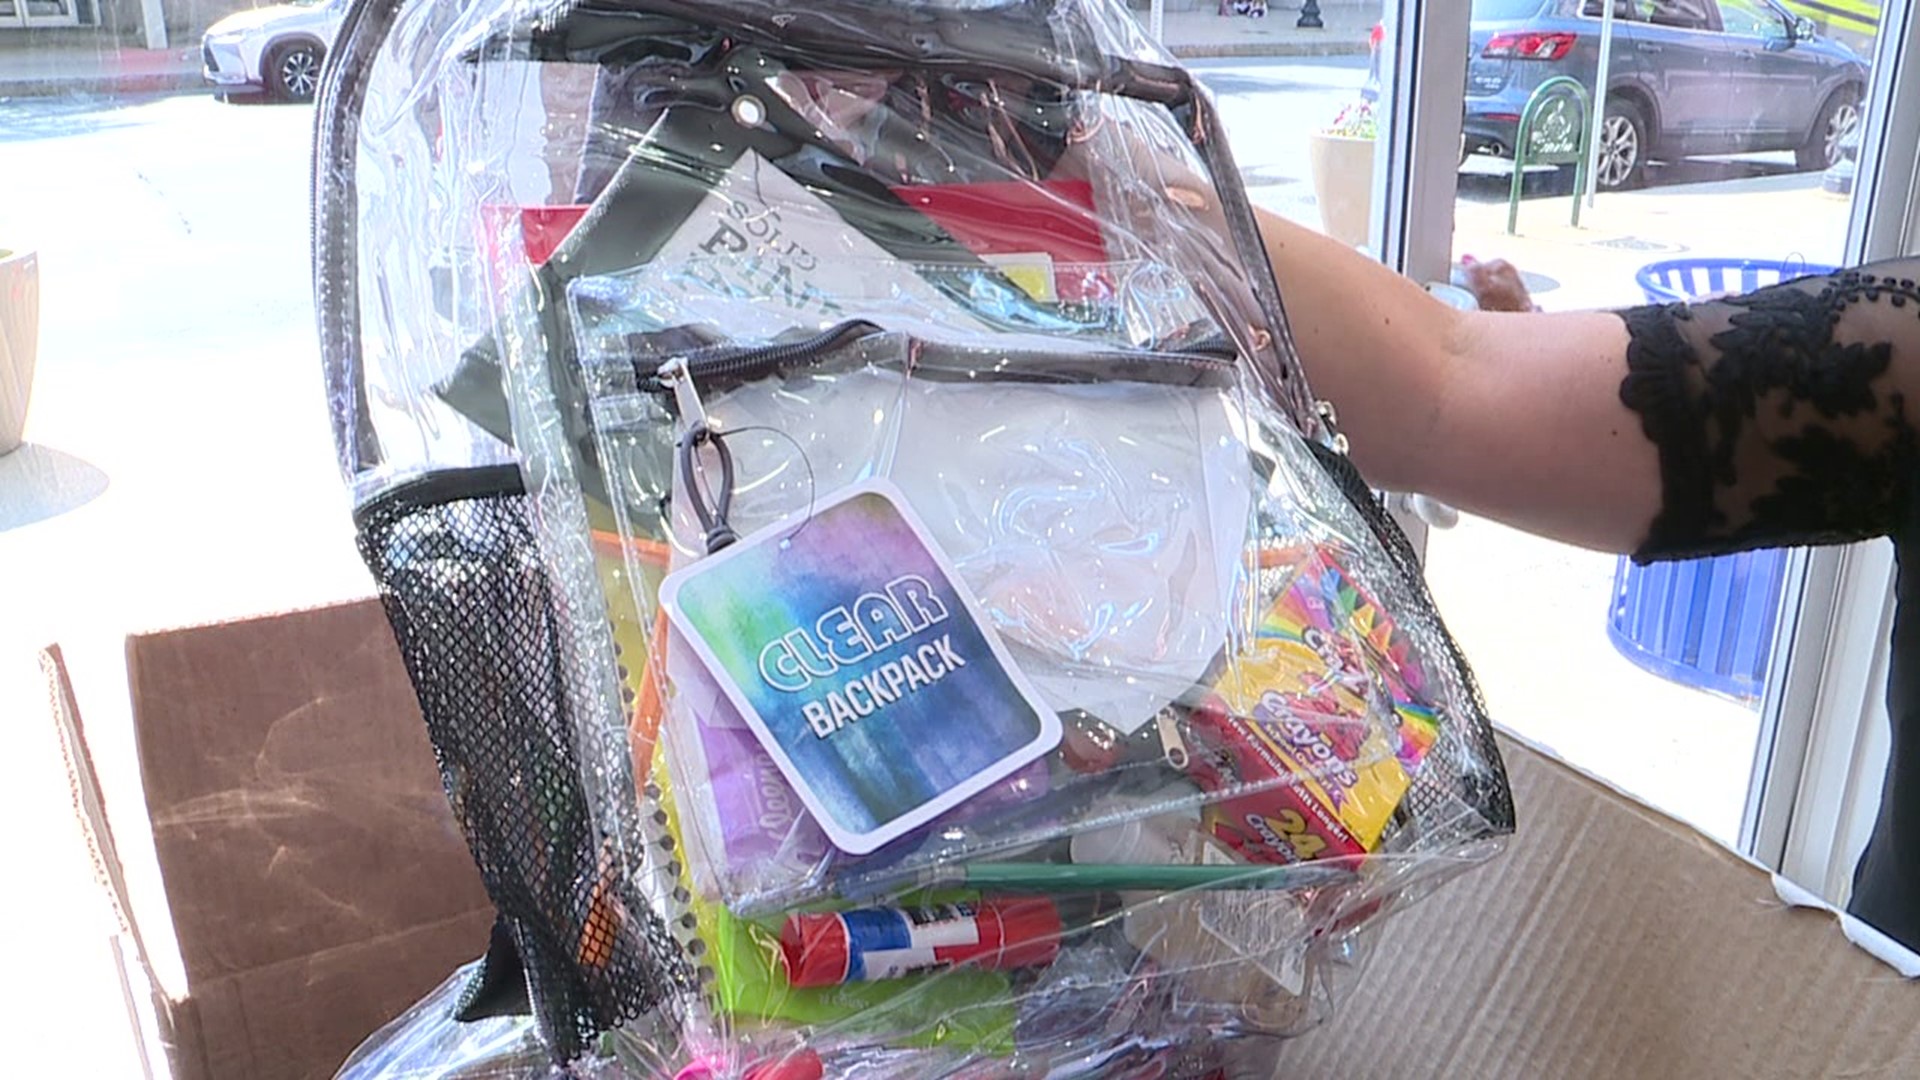 As kids are preparing for a new school year, county officials and a company in Lackawanna County are helping those kids by passing out free backpacks.